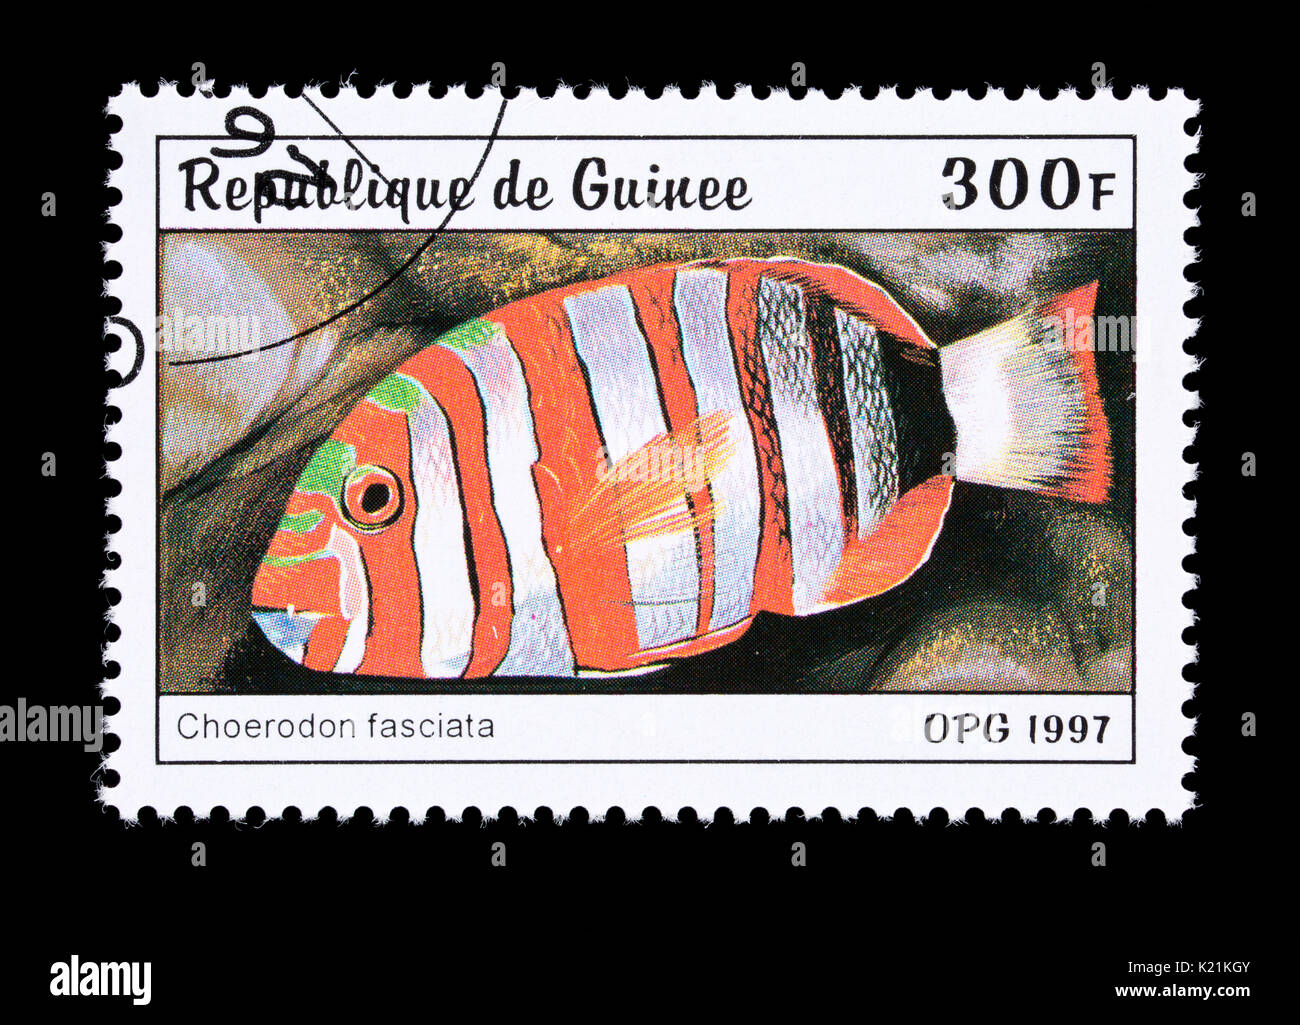 Postage stamp from Guinea depicting a harlequin tuskfish (Choerodon fasciatus) Stock Photo